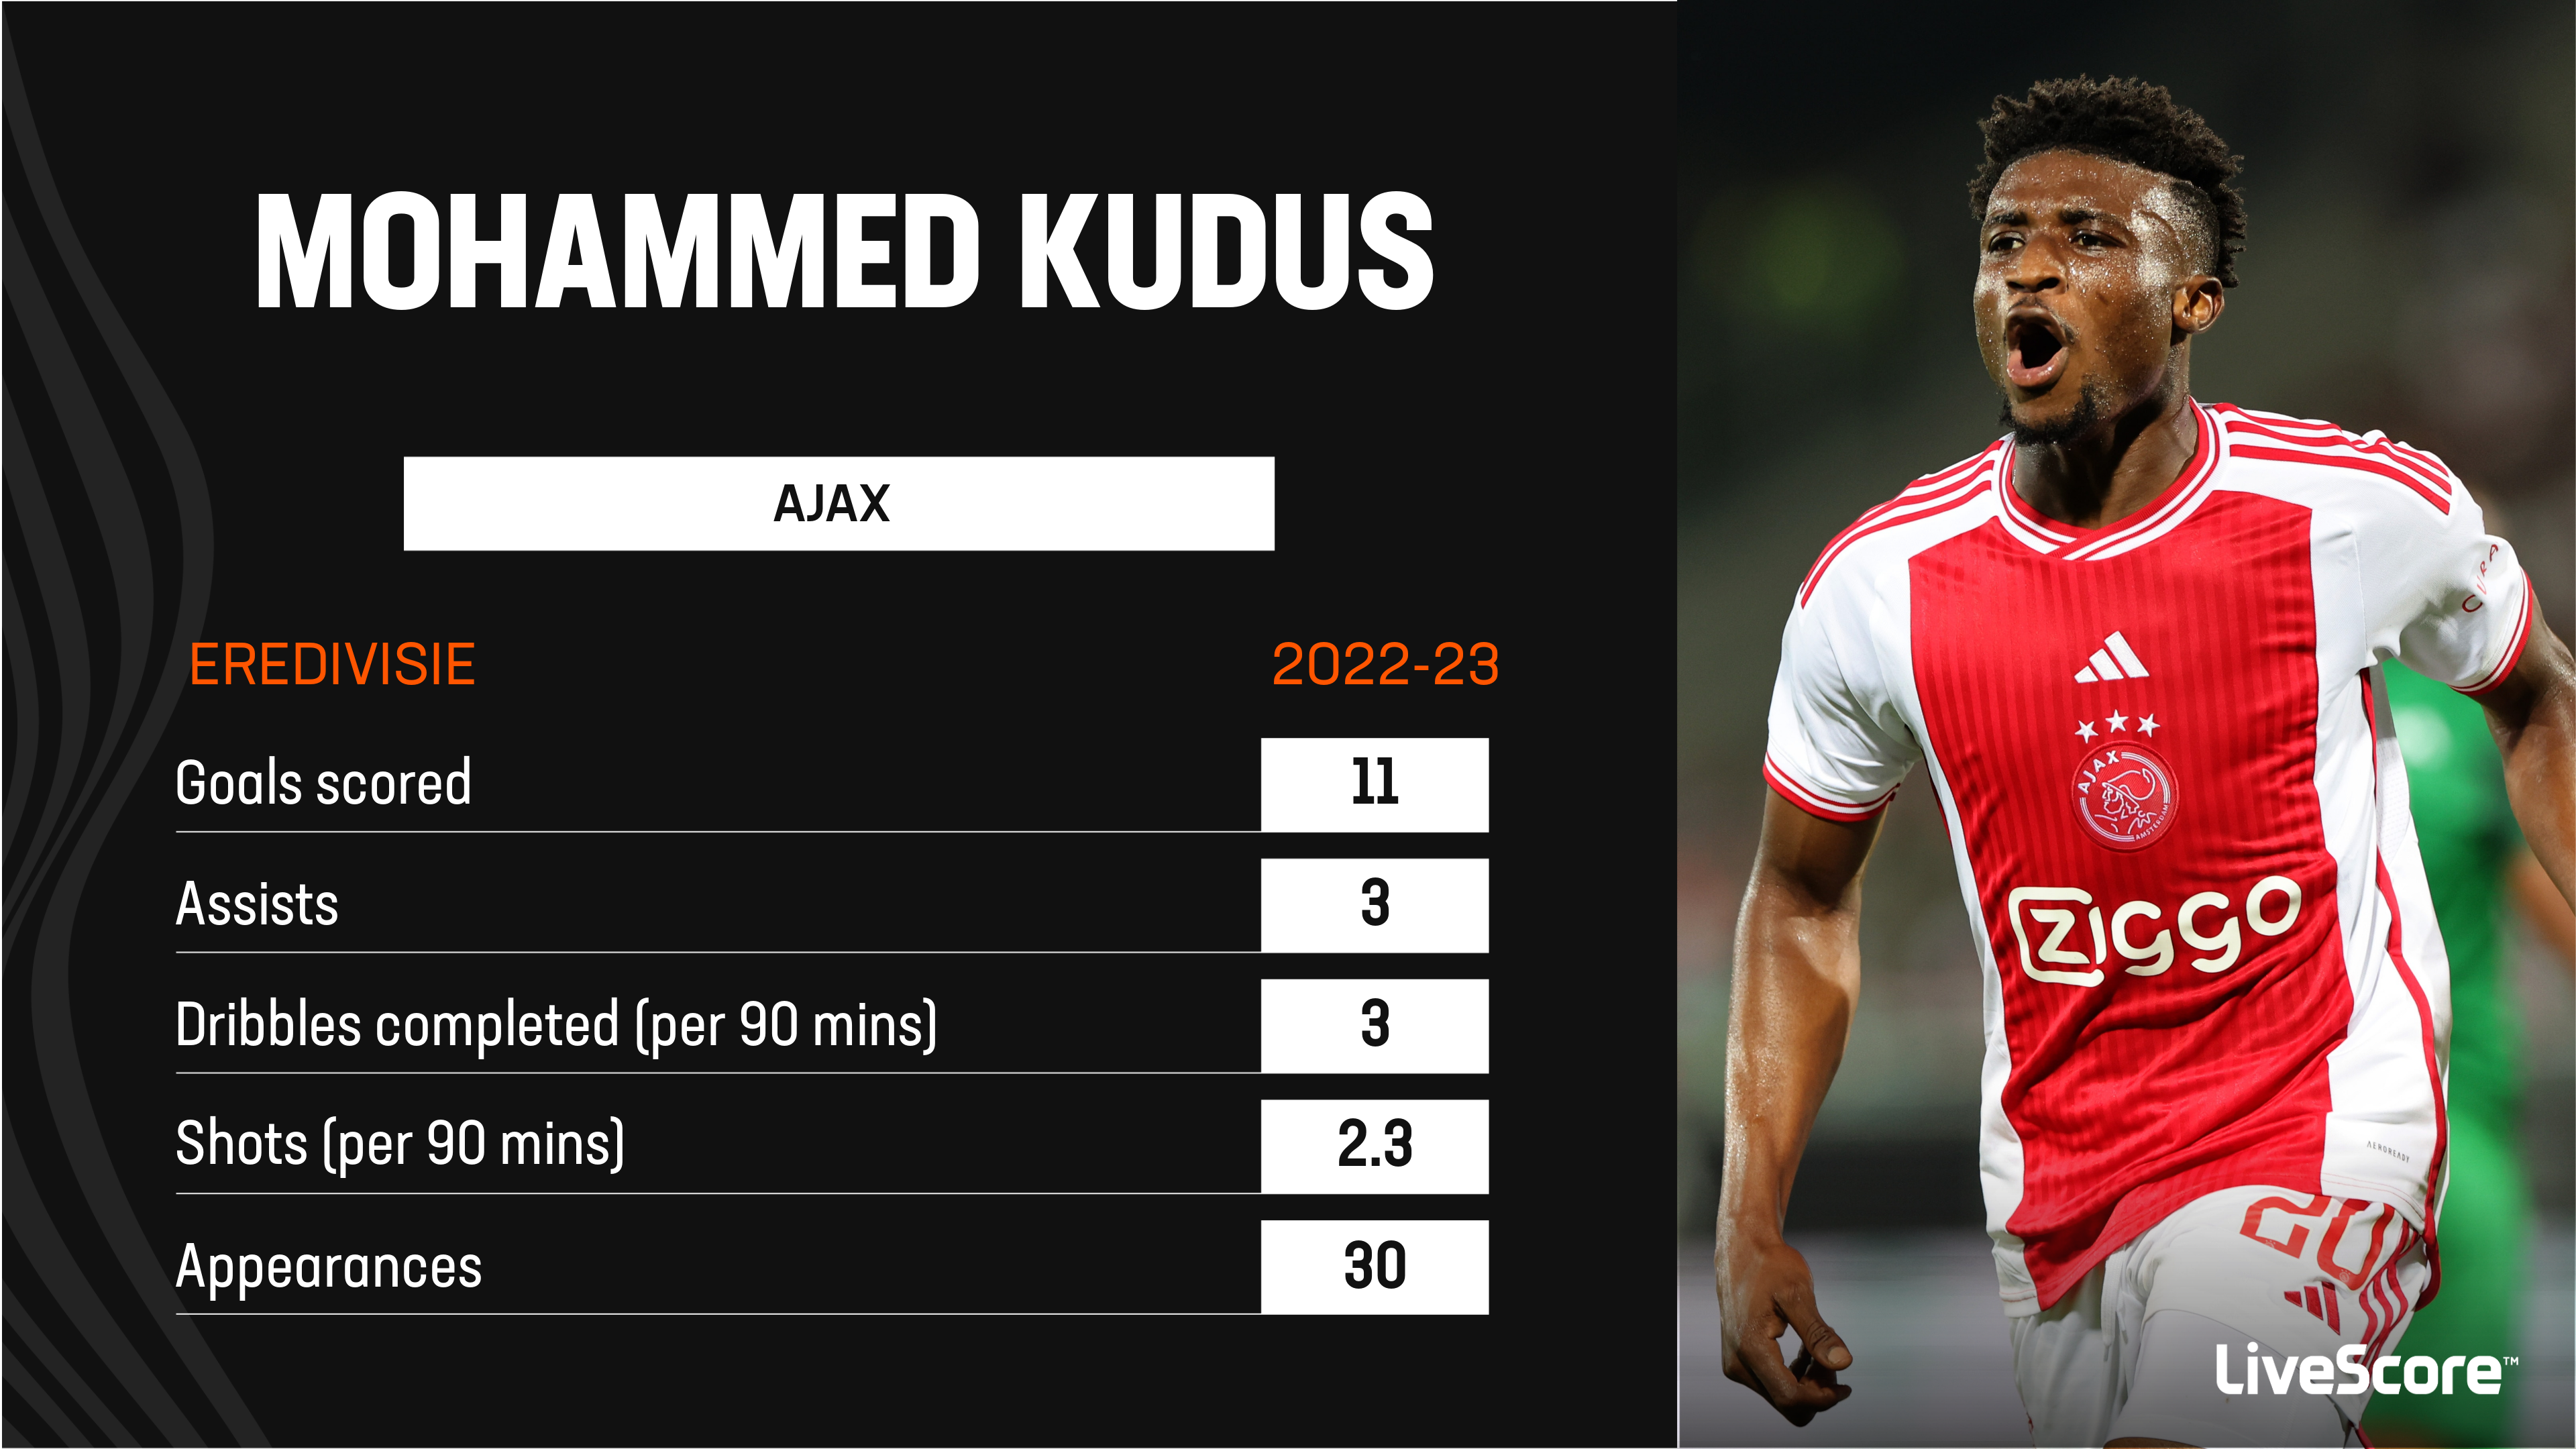 Mohammed Kudus was one of the Eredivisie's best attackers last season